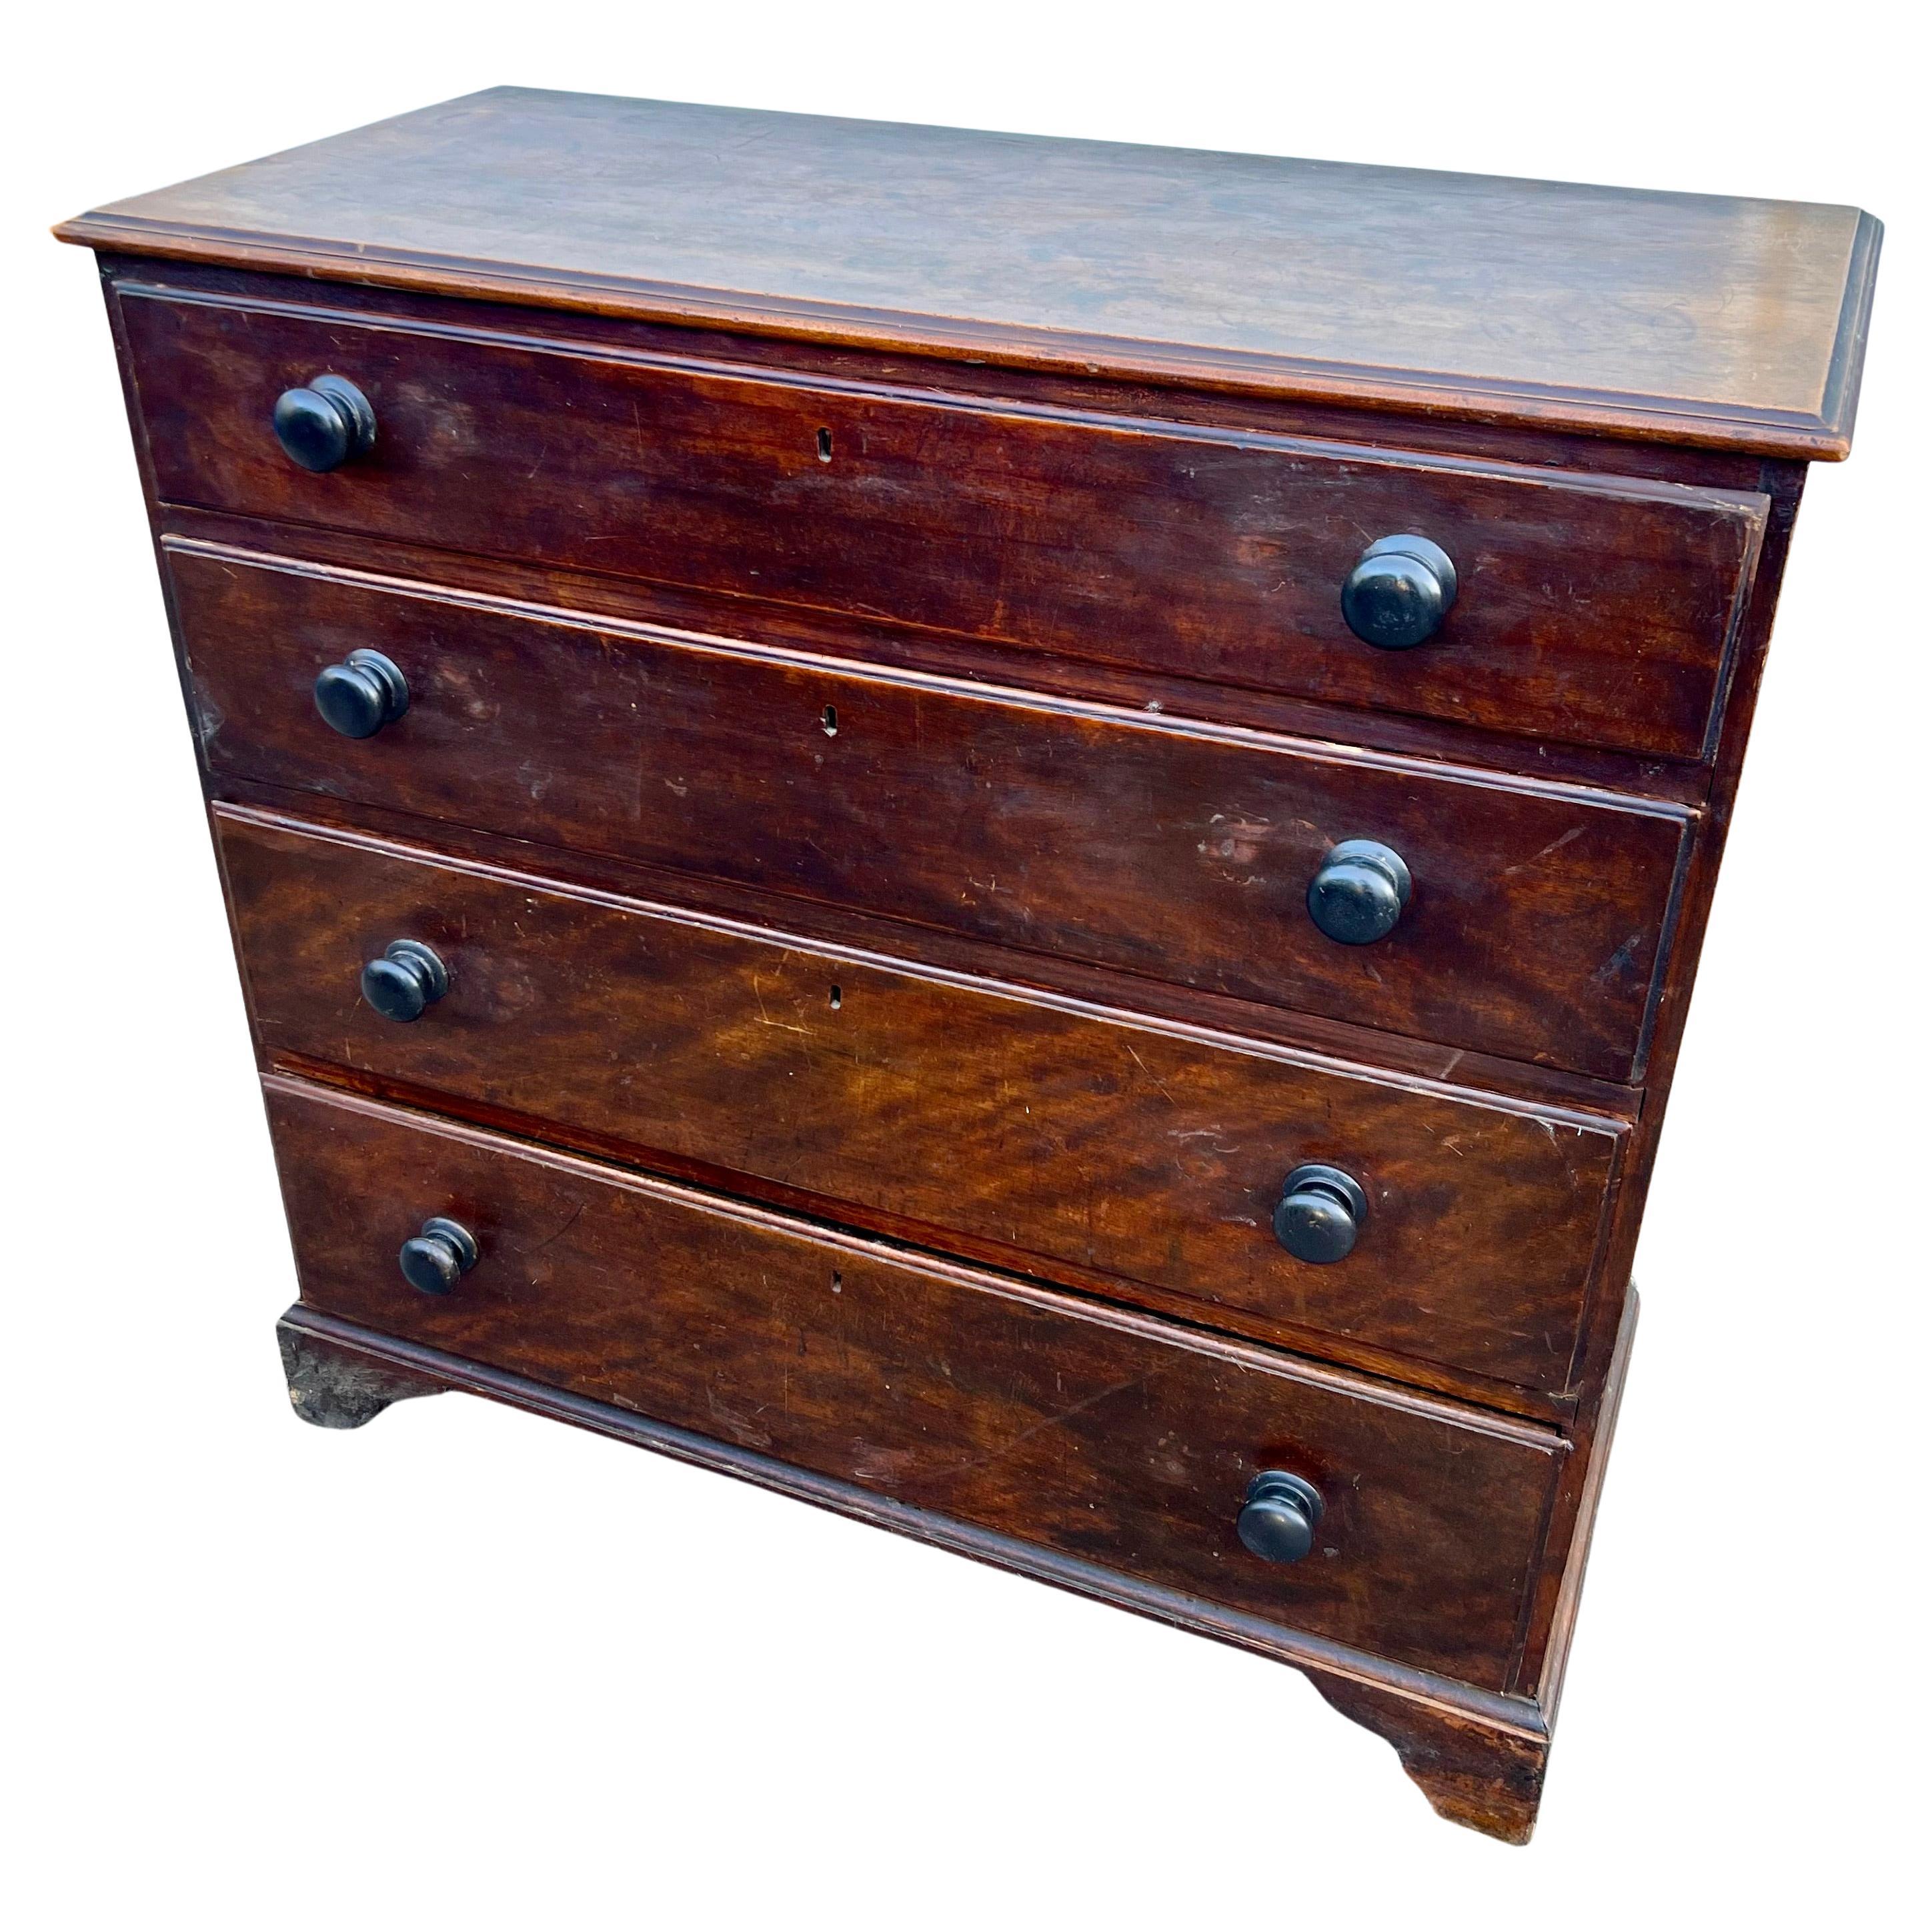 Early 19th Century Flame Birch Chest of Drawers